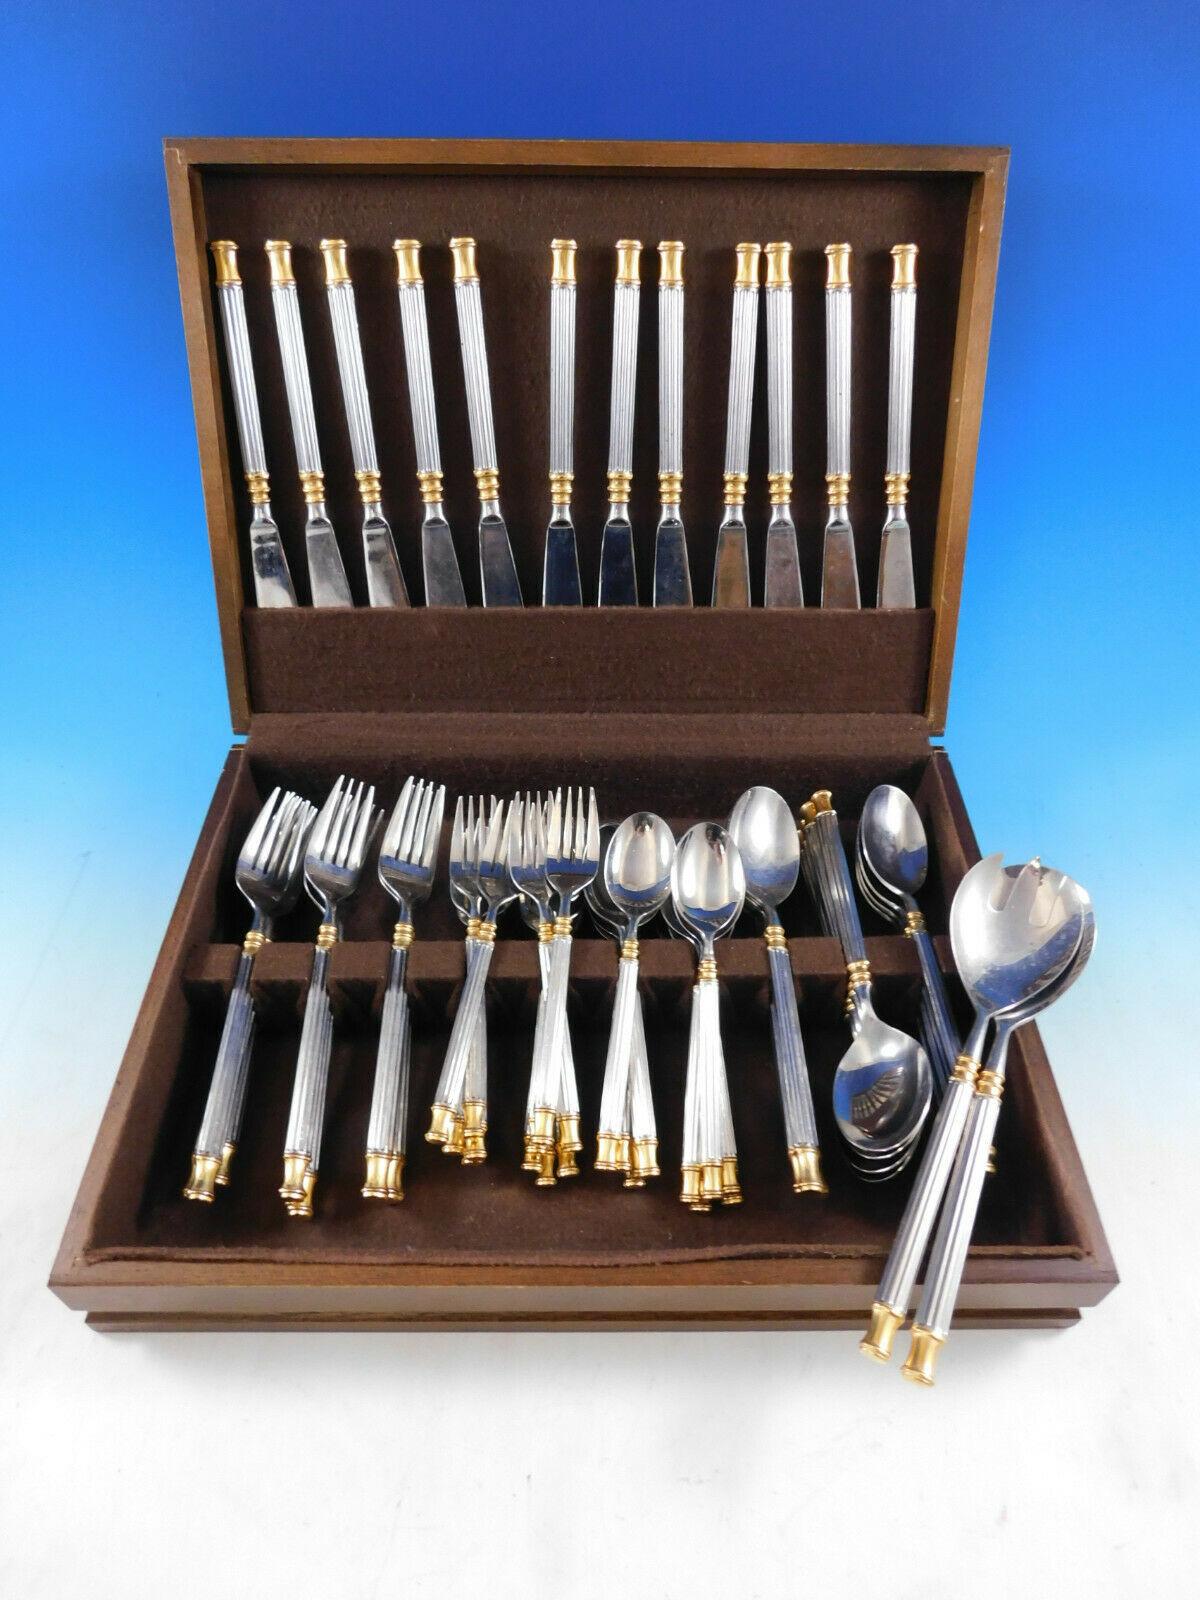 Tucano gold accent by Sasaki Japan estate stainless steel flatware set, 62pieces. This set includes:

12 knives, 8 3/4